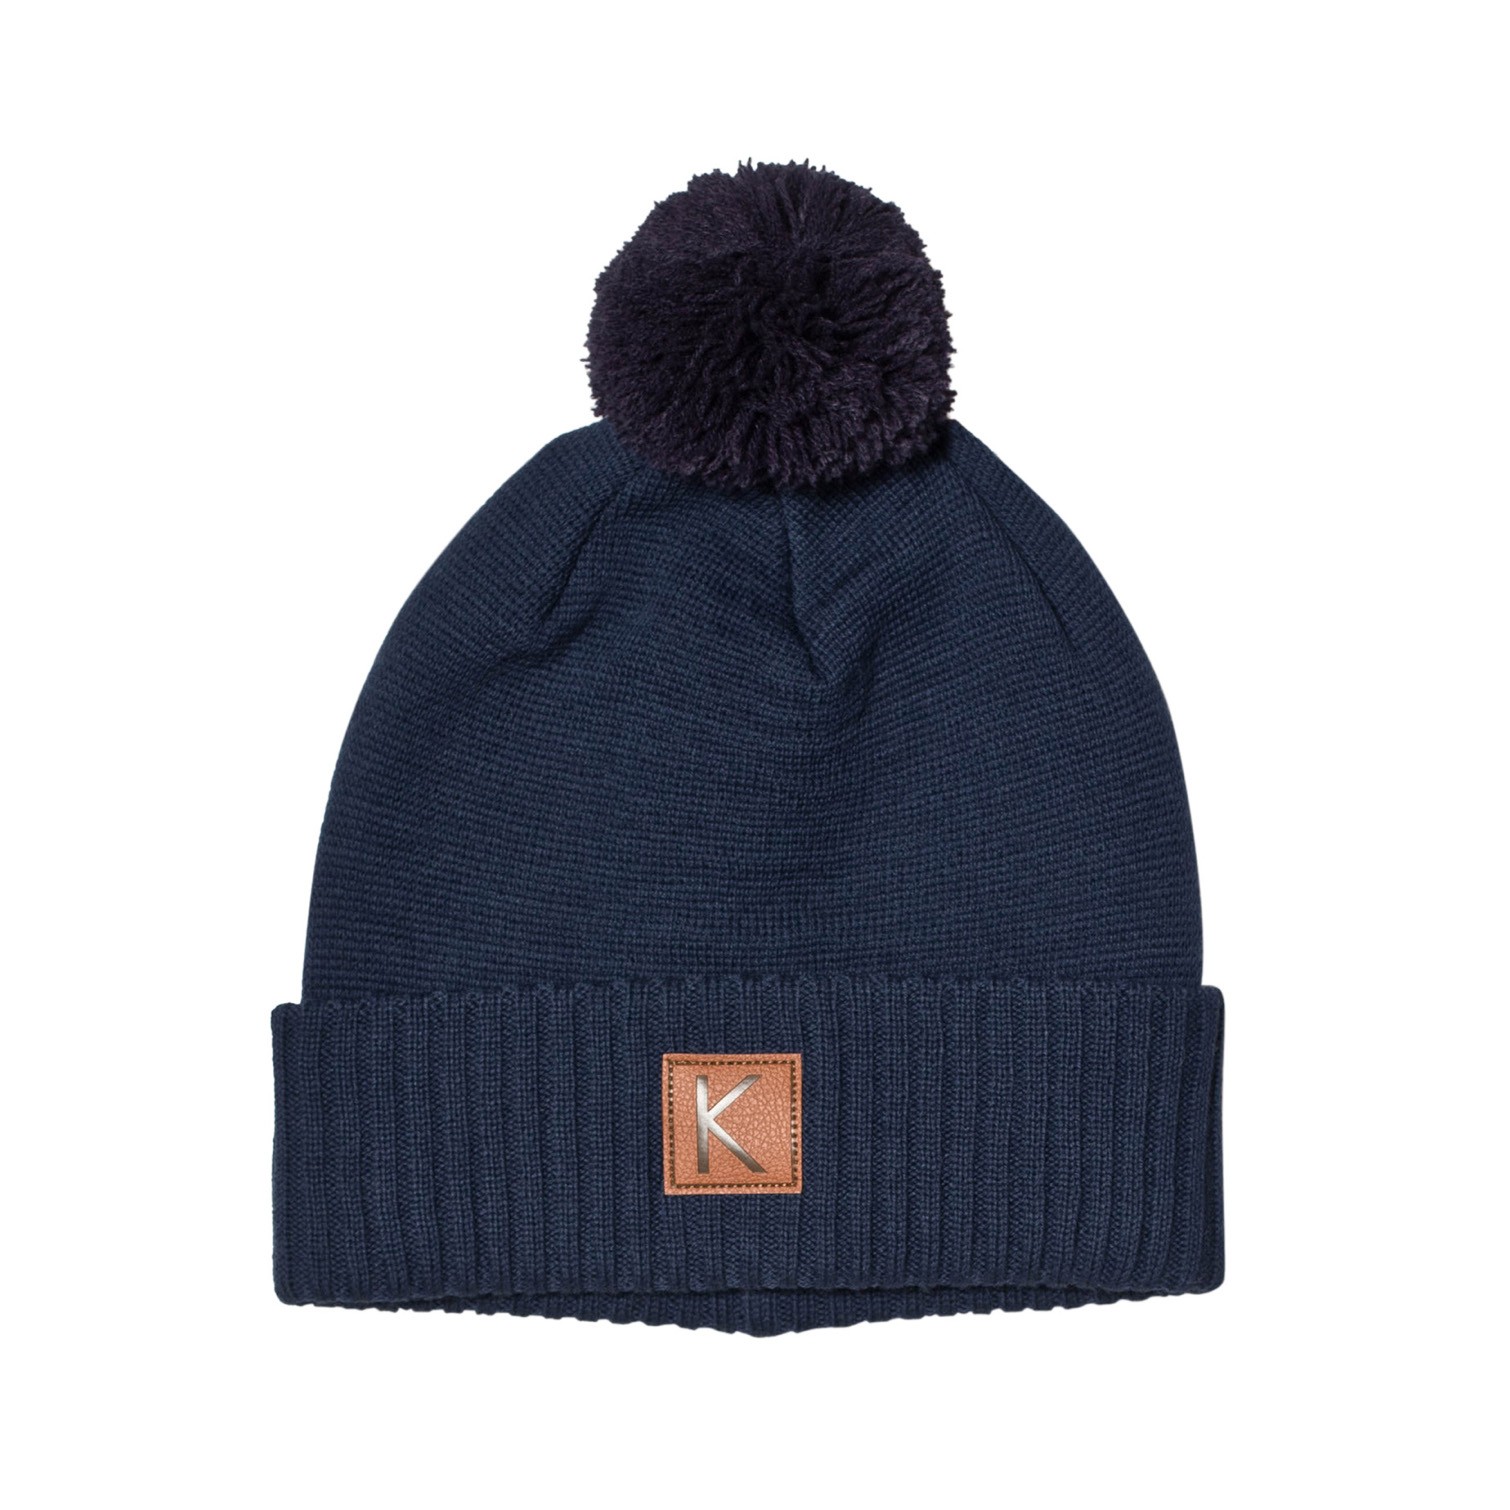 Classic Kids Navy Beanie from Kuling